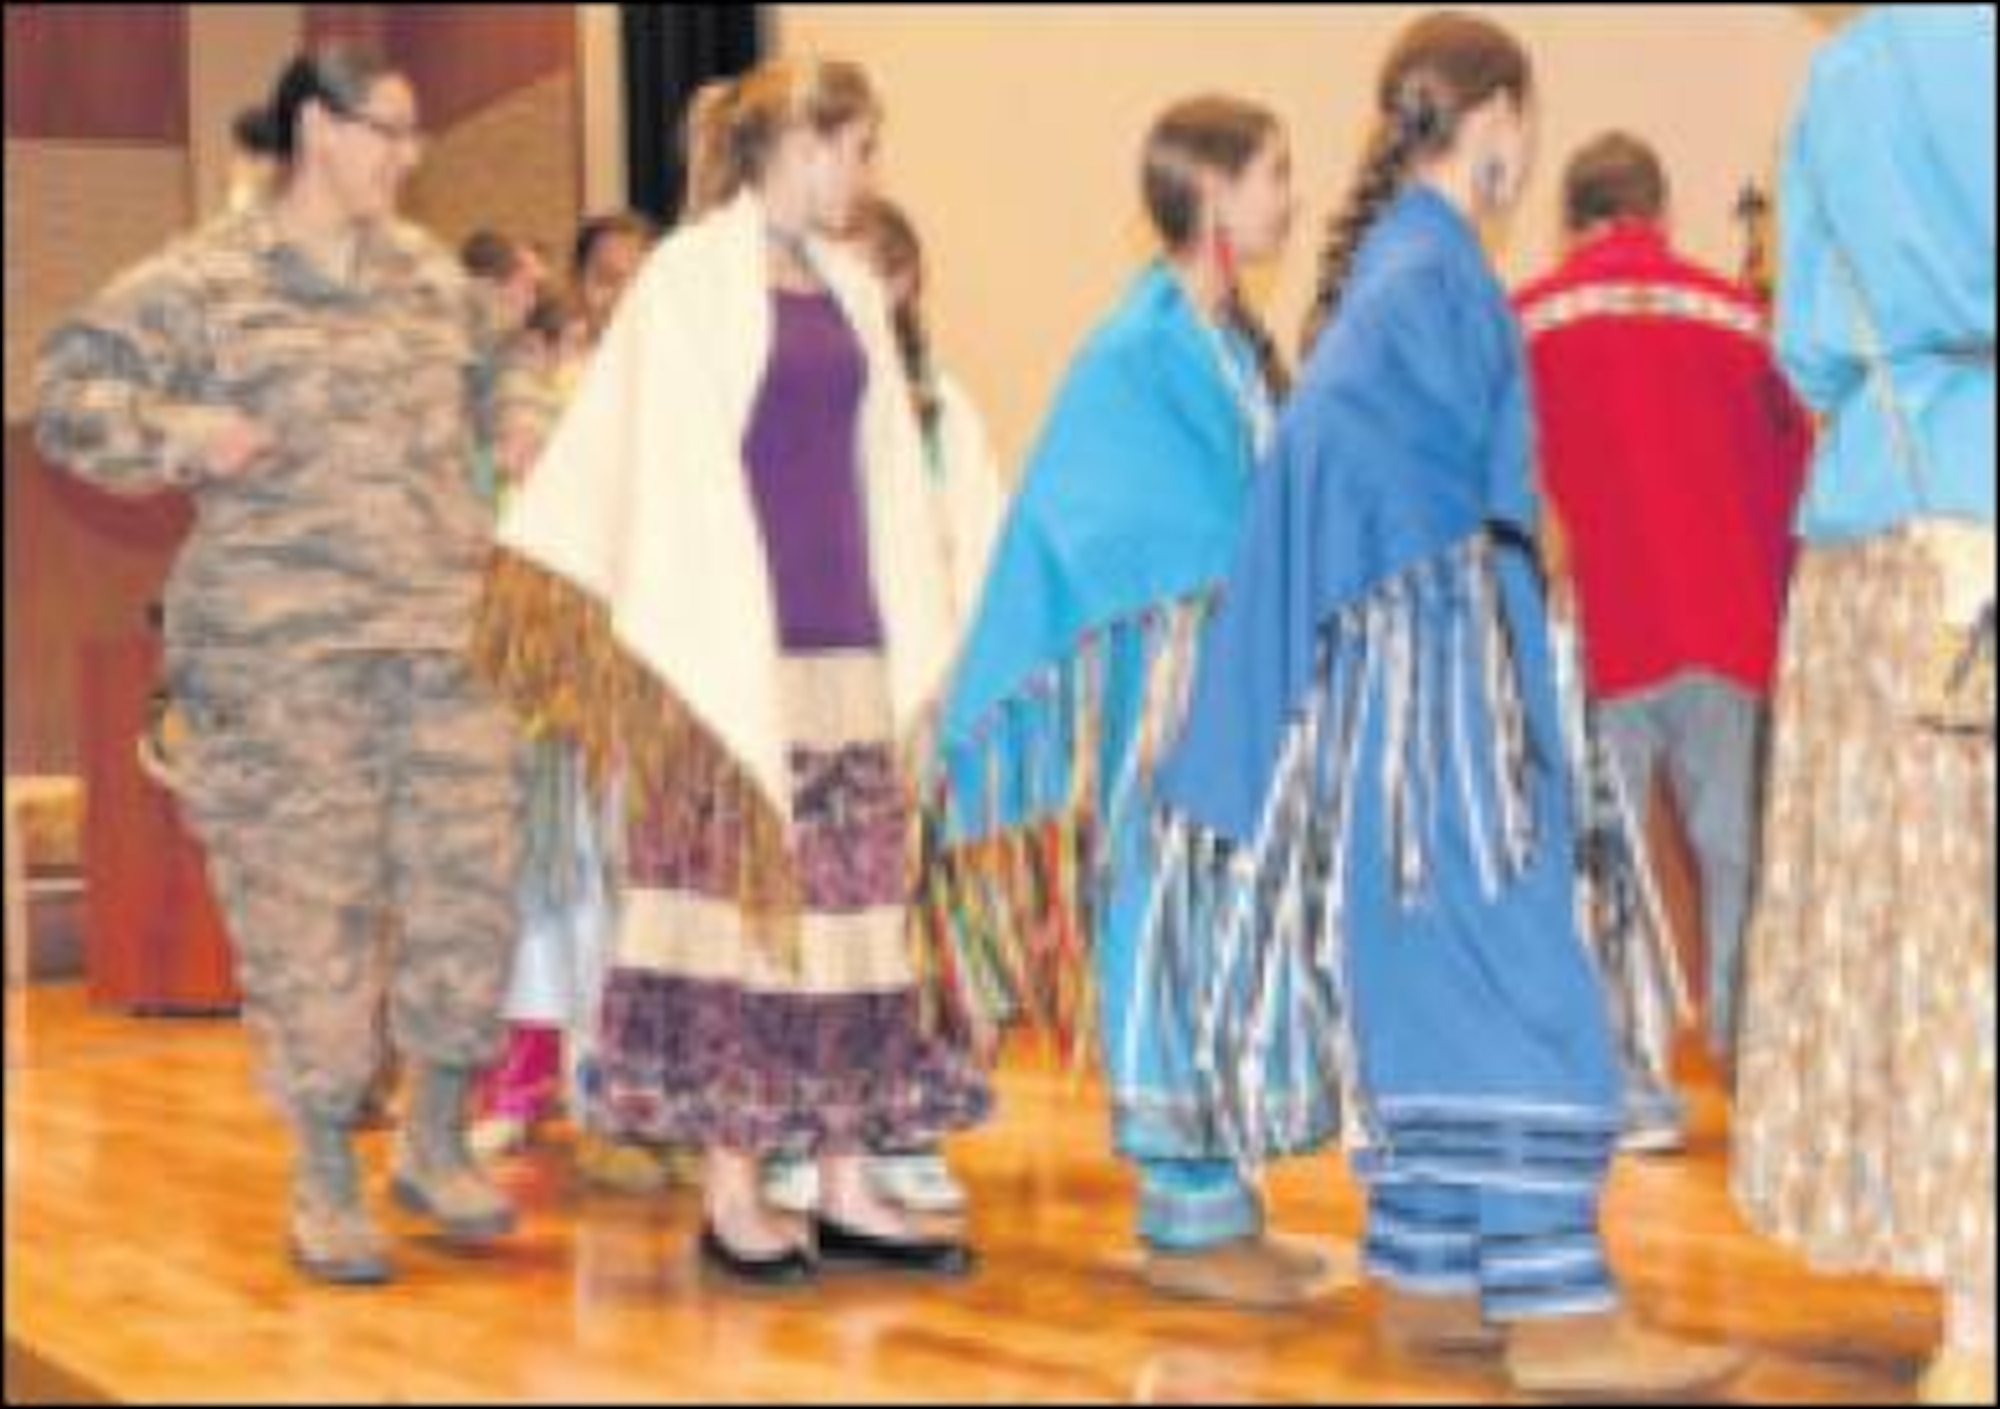 Tech. Sgt. Christine Carter, National Air and Space Intelligence Center, participates in a traditional Native American blanket dance. (Air Force photo by Staff Sgt. Eunique Thomas) 